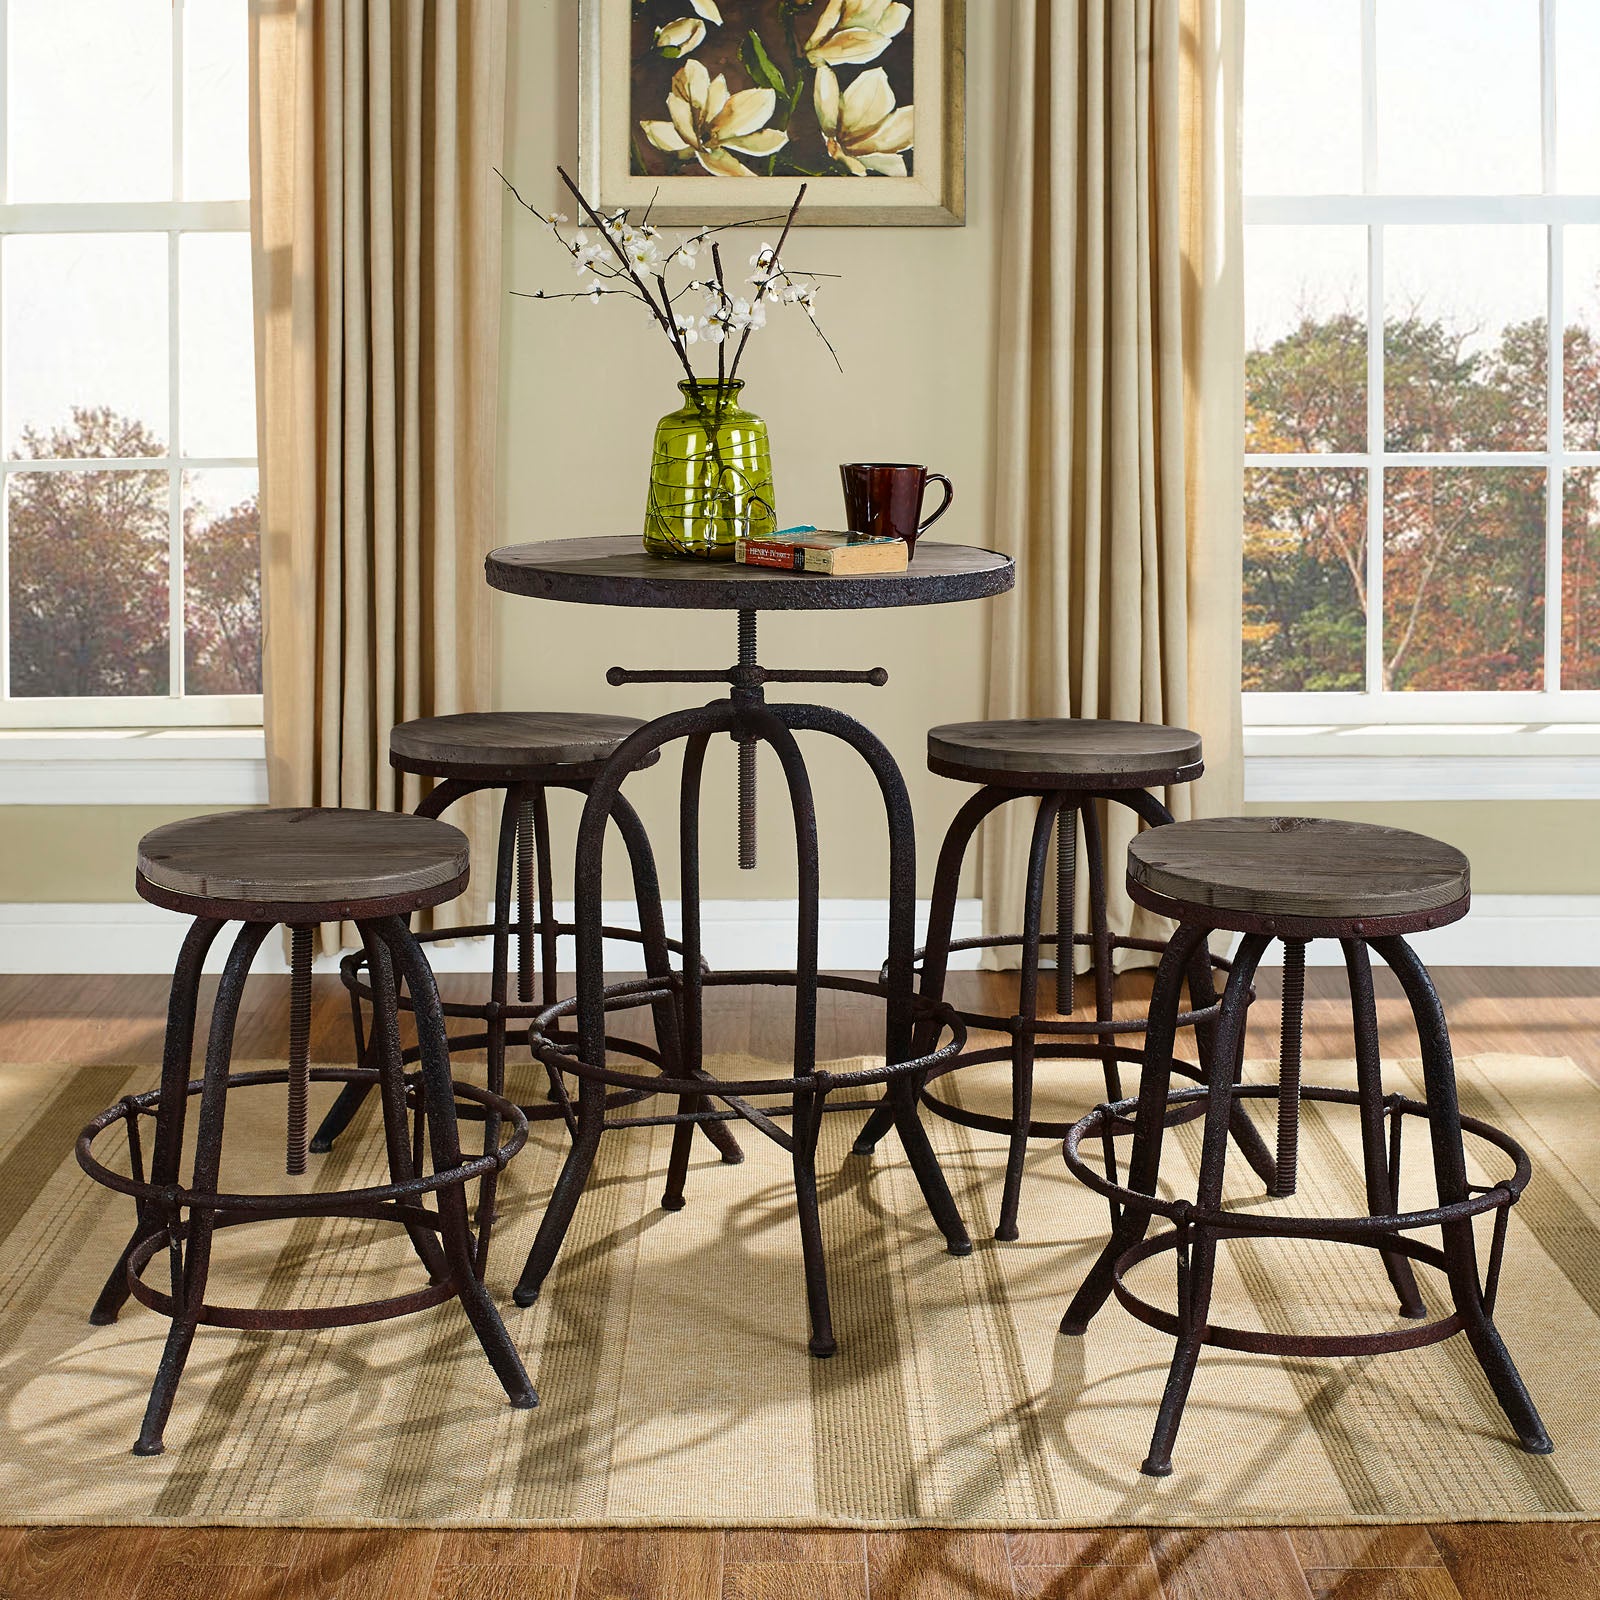 Gather 5 Piece Dining Set - East Shore Modern Home Furnishings